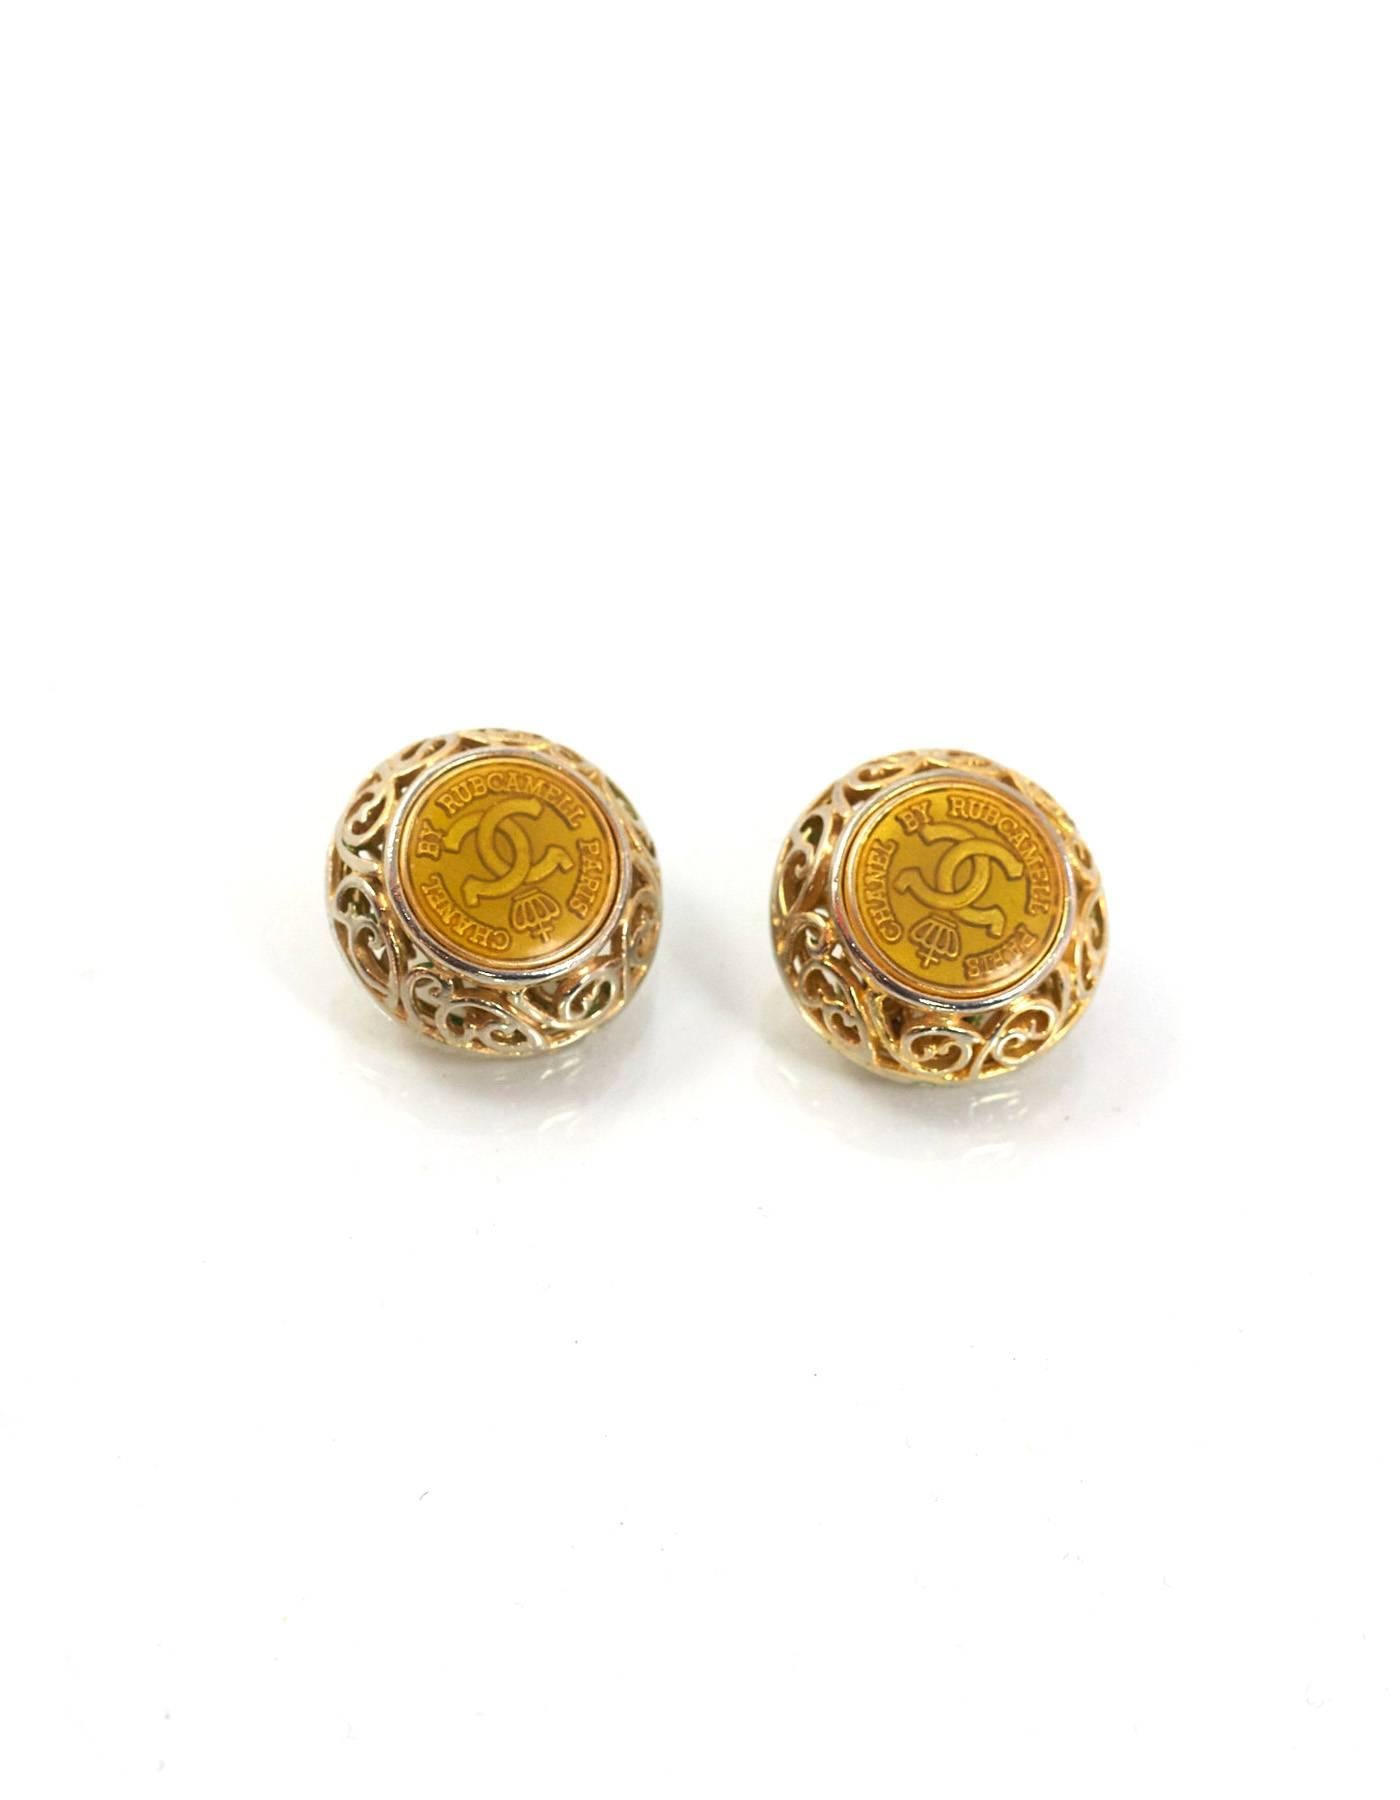 Chanel Gold Coin & Filigree Clip On Earrings
Features center CC coin

Made In: France
Year of Production: 1990-1992
Color: Goldtone
Materials: Metal
Closure/Opening: Clip on back
Stamp: Chanel CC Made in France
Overall Condition: Very good